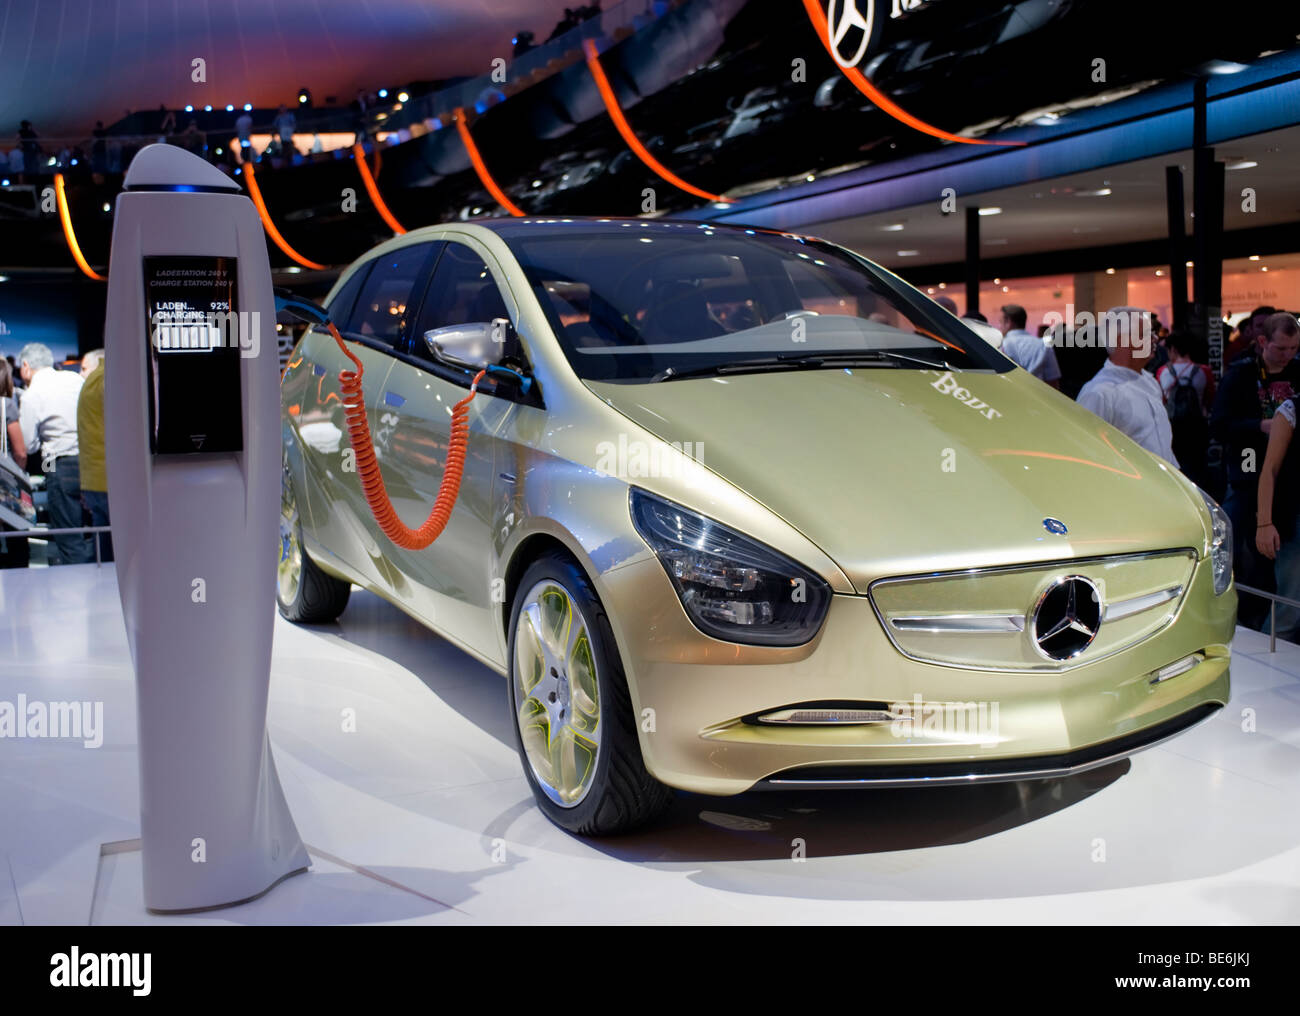 Mercedes Blue Zero lithium battery powered electric car prototype on show at the Frankfurt Motor Show 2009 Stock Photo